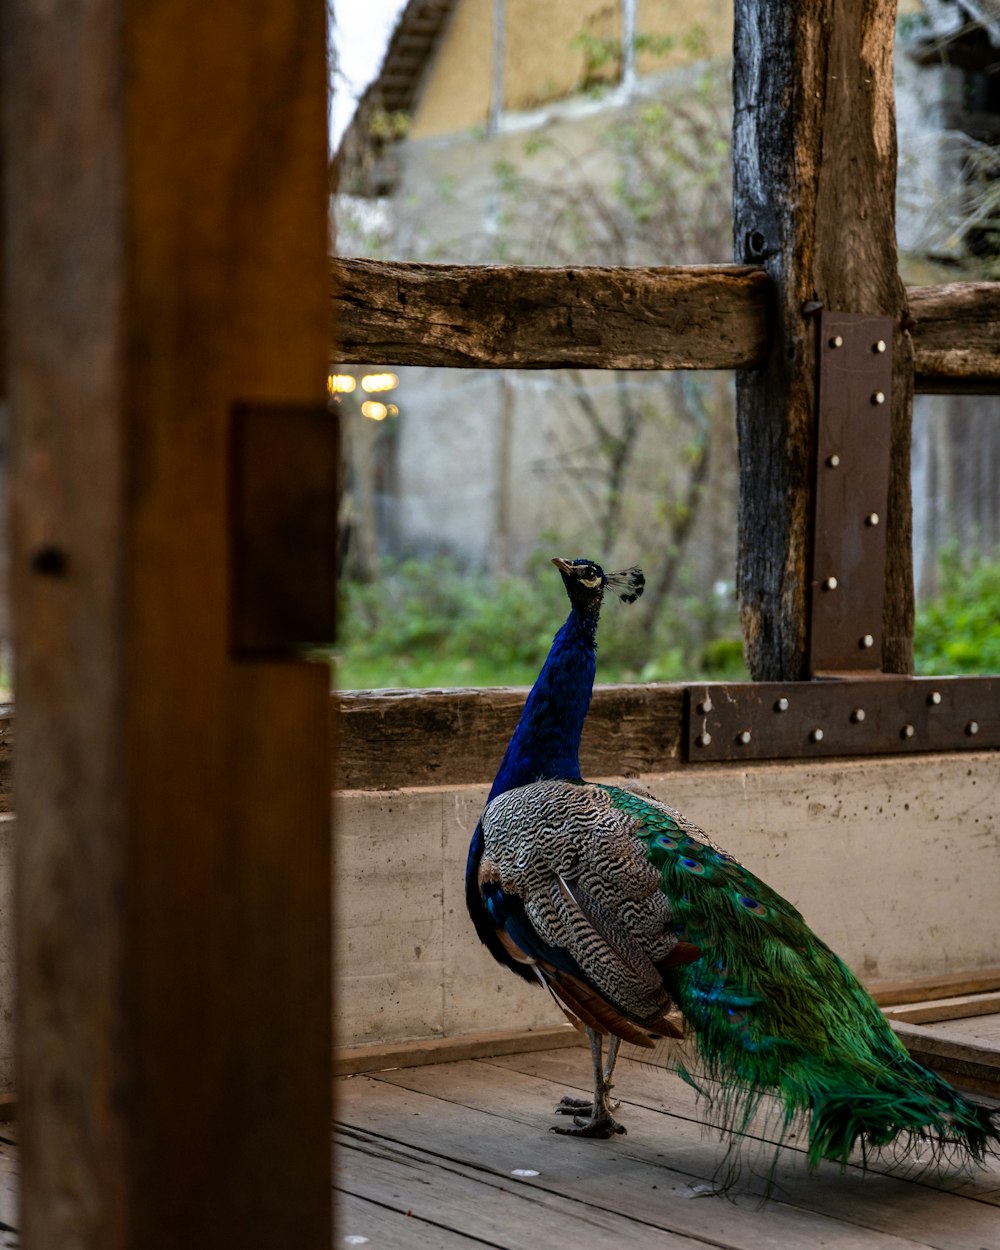 a peacock standing on top of a wooden floor